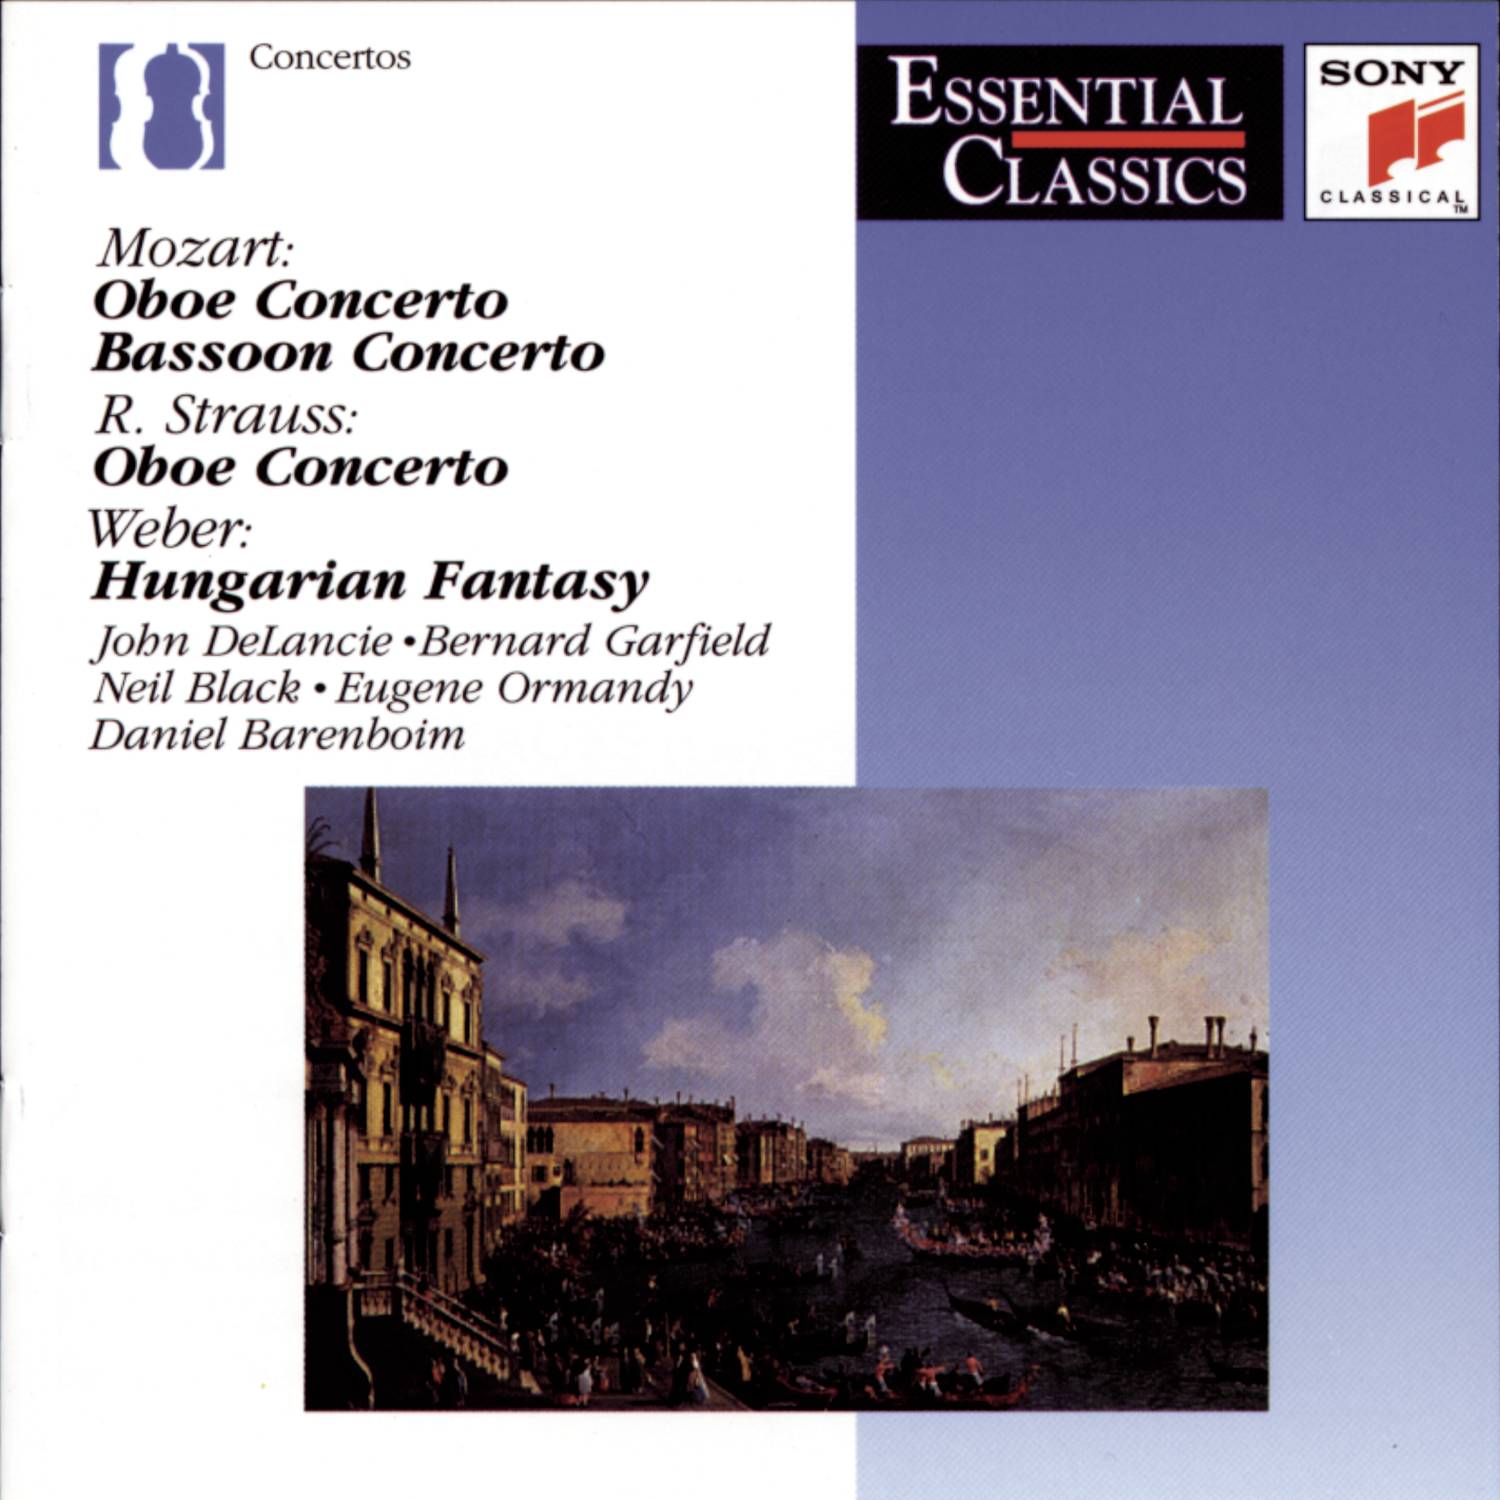 Concerto for Oboe and Small Orchestra: Vivace